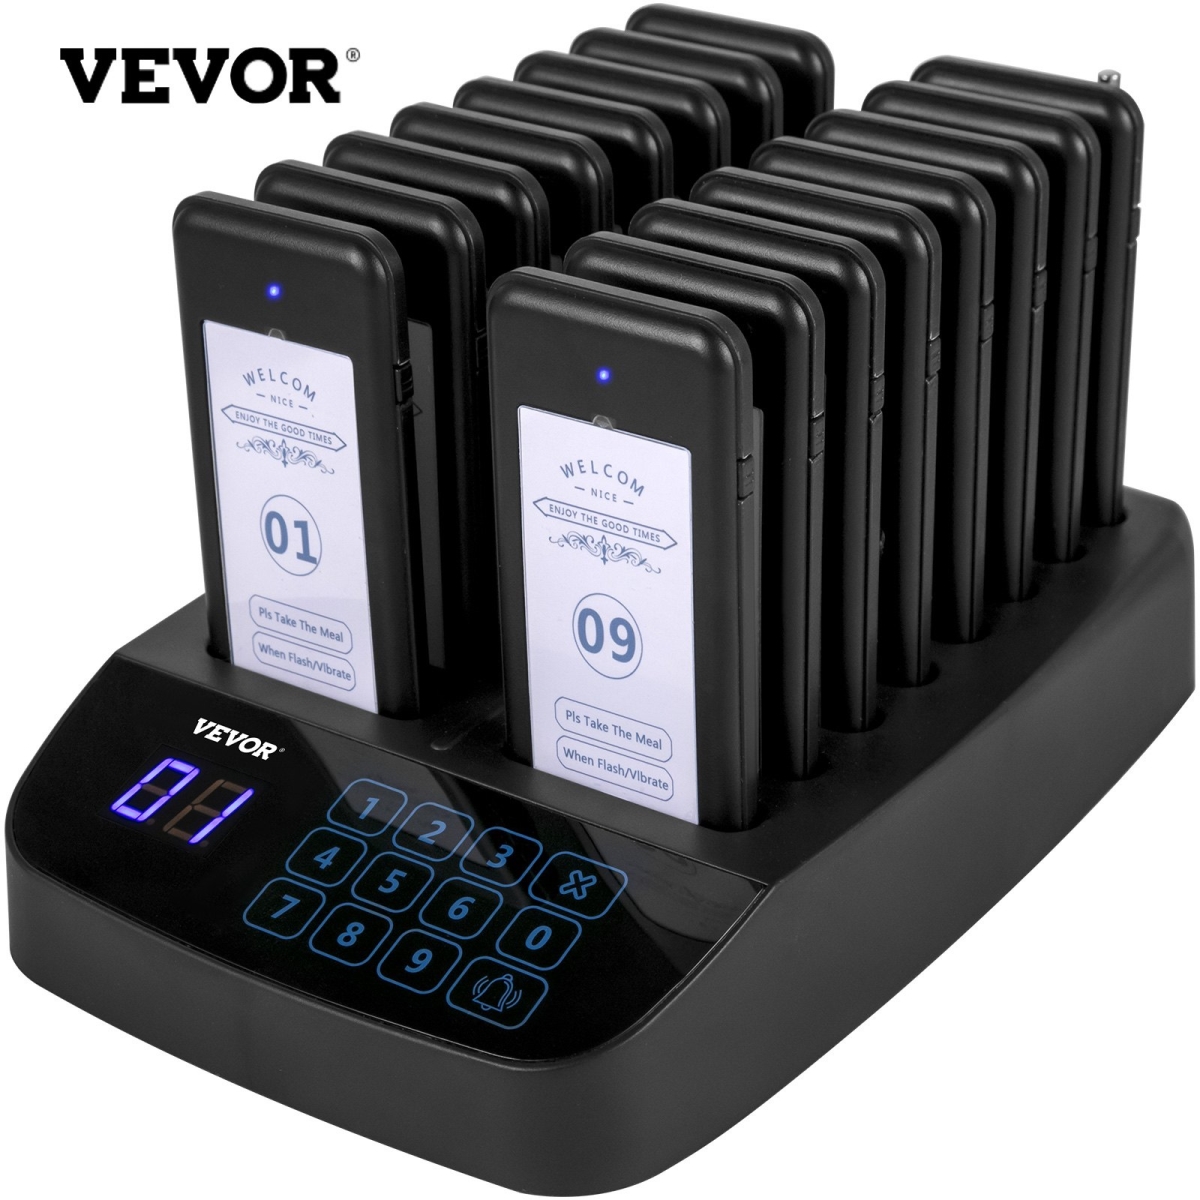 Picture of Vevor QCQFX16KCCMPM0001V1 F101 Restaurant Pager System 16 Pagers